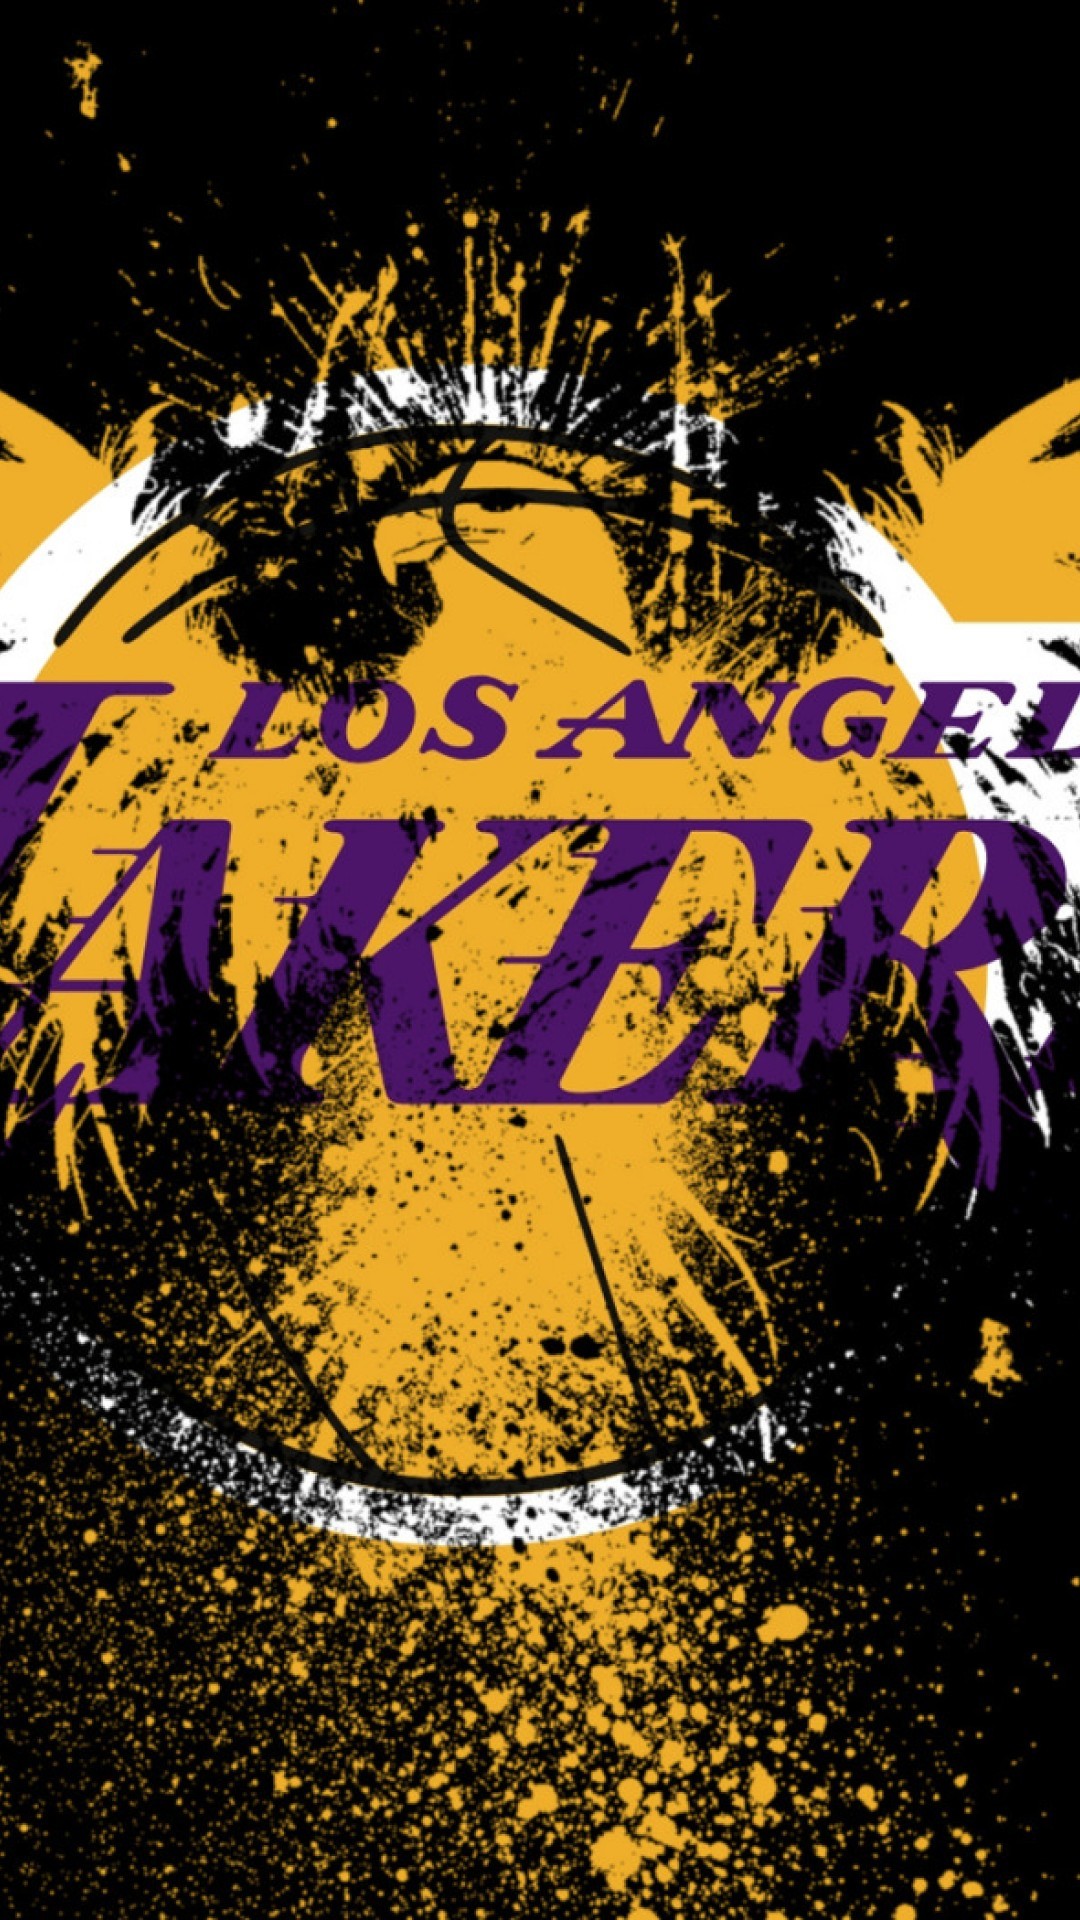 Lakers Wallpapers (77+ images)